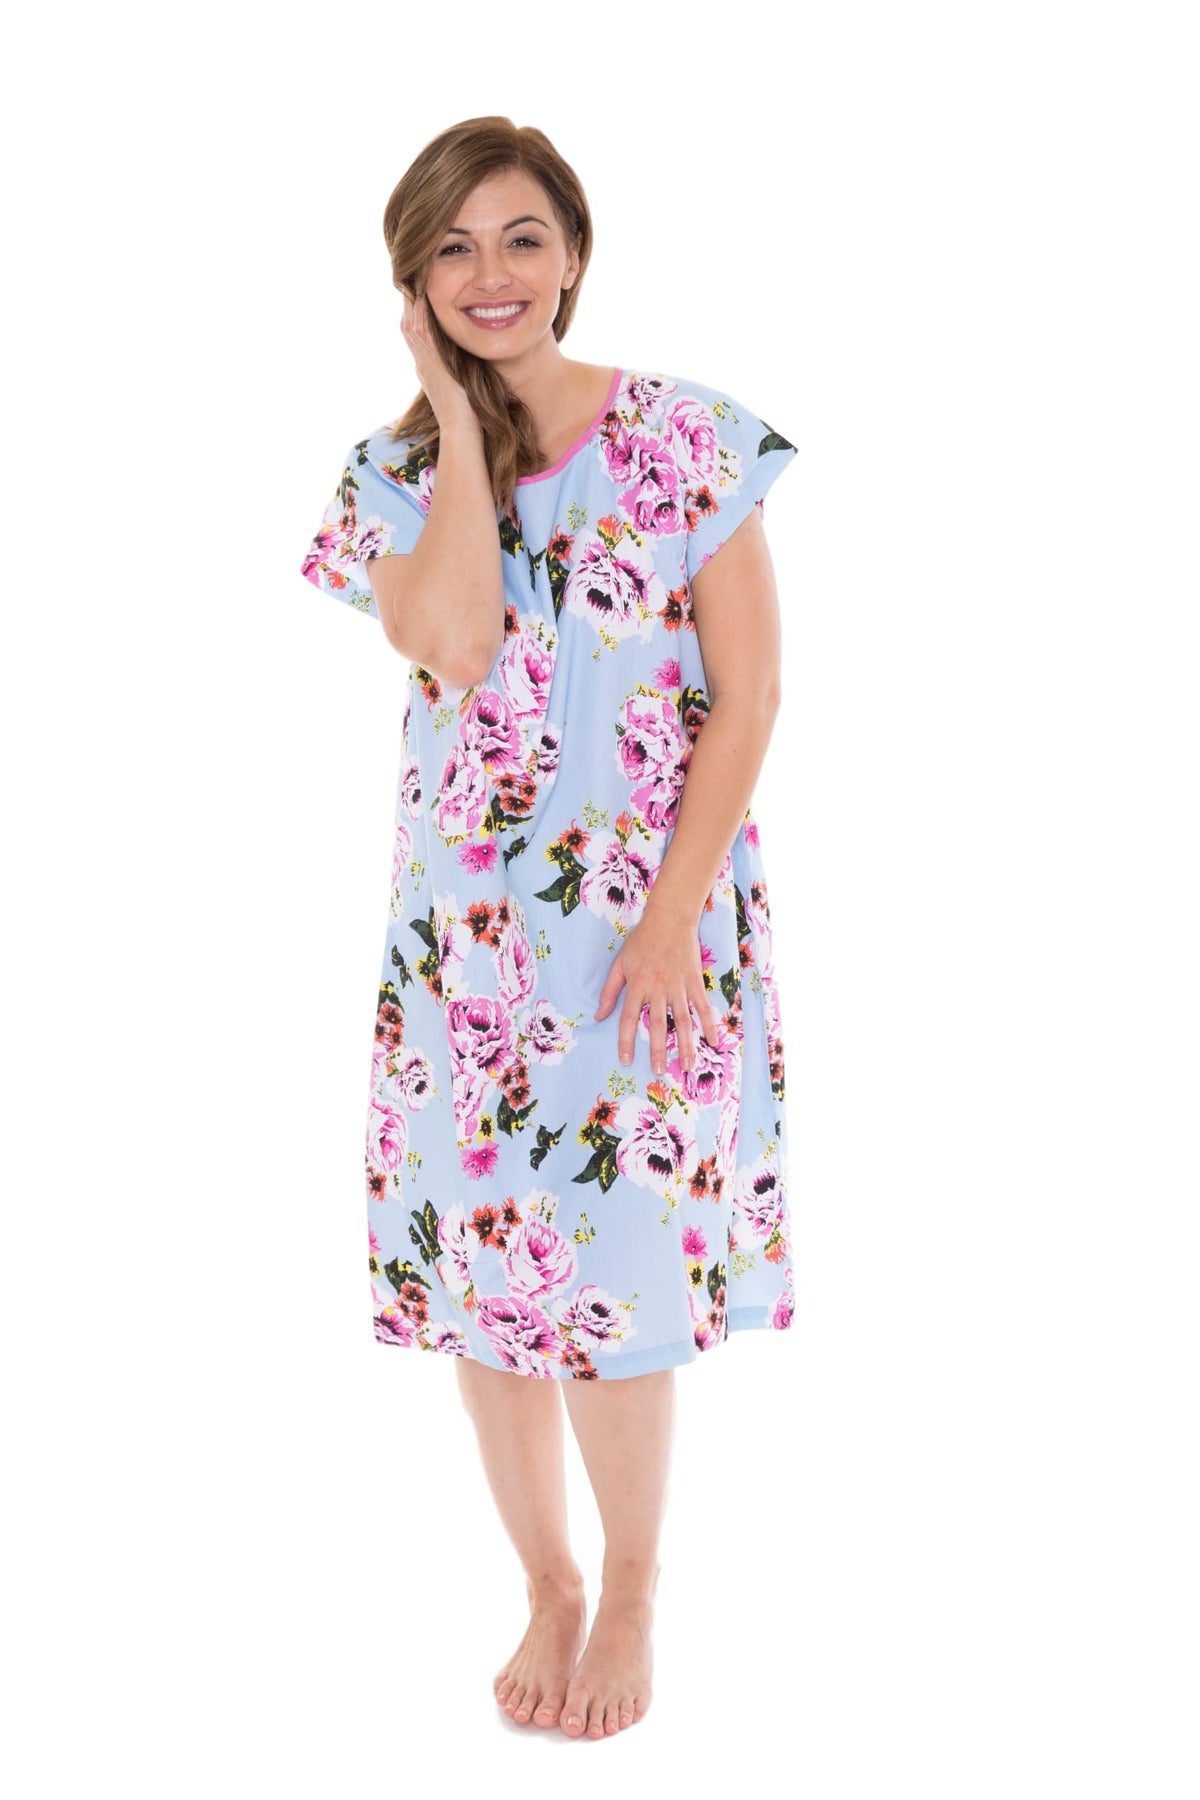 Blue Pink Floral Surgery Recovery Chemo Patient Hospital Gown Gownies ...